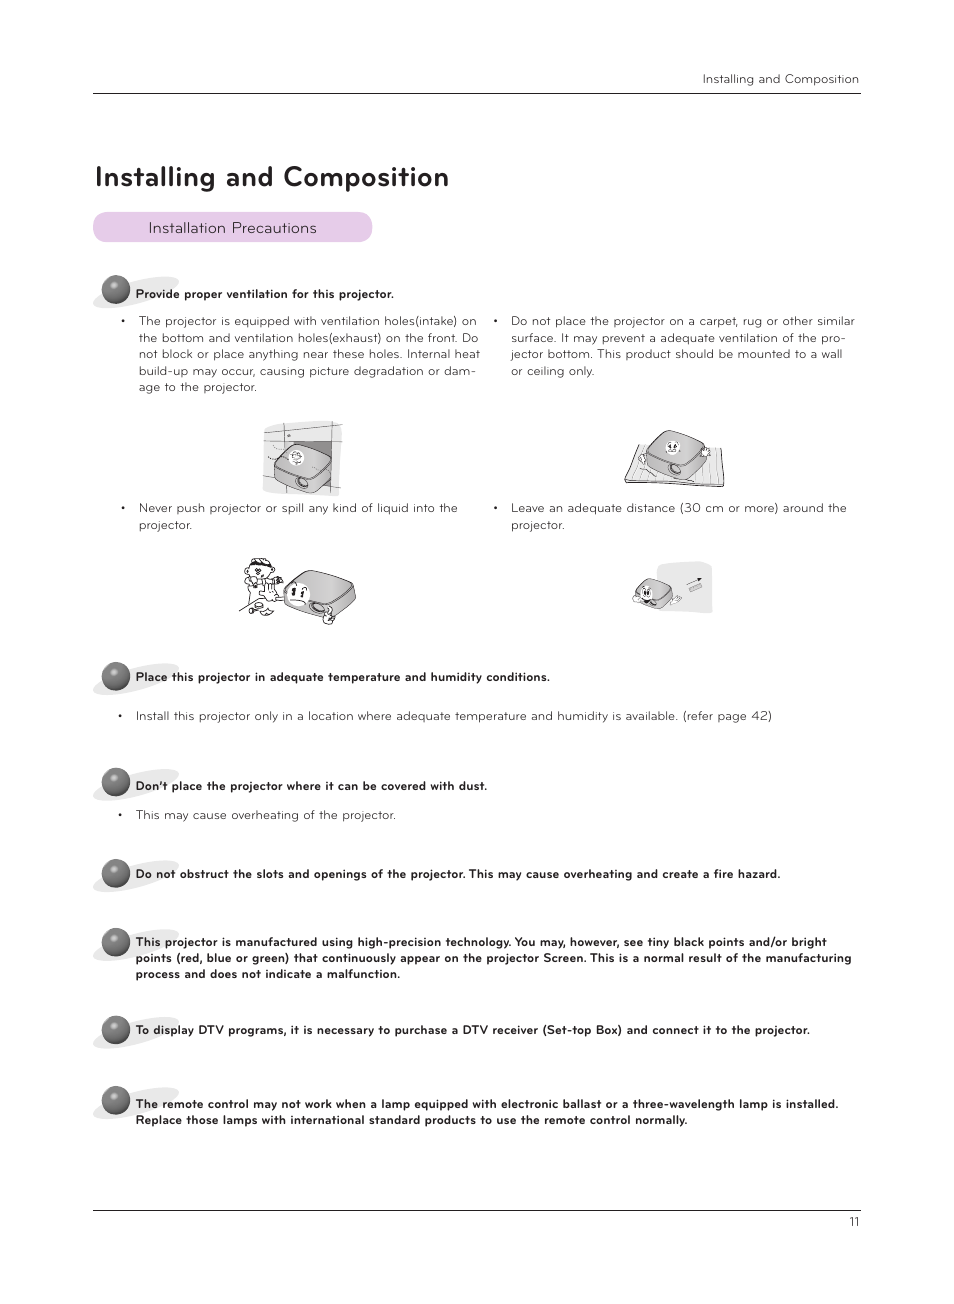 Installing and composition, Installation precautions | LG HX301G User Manual | Page 11 / 44